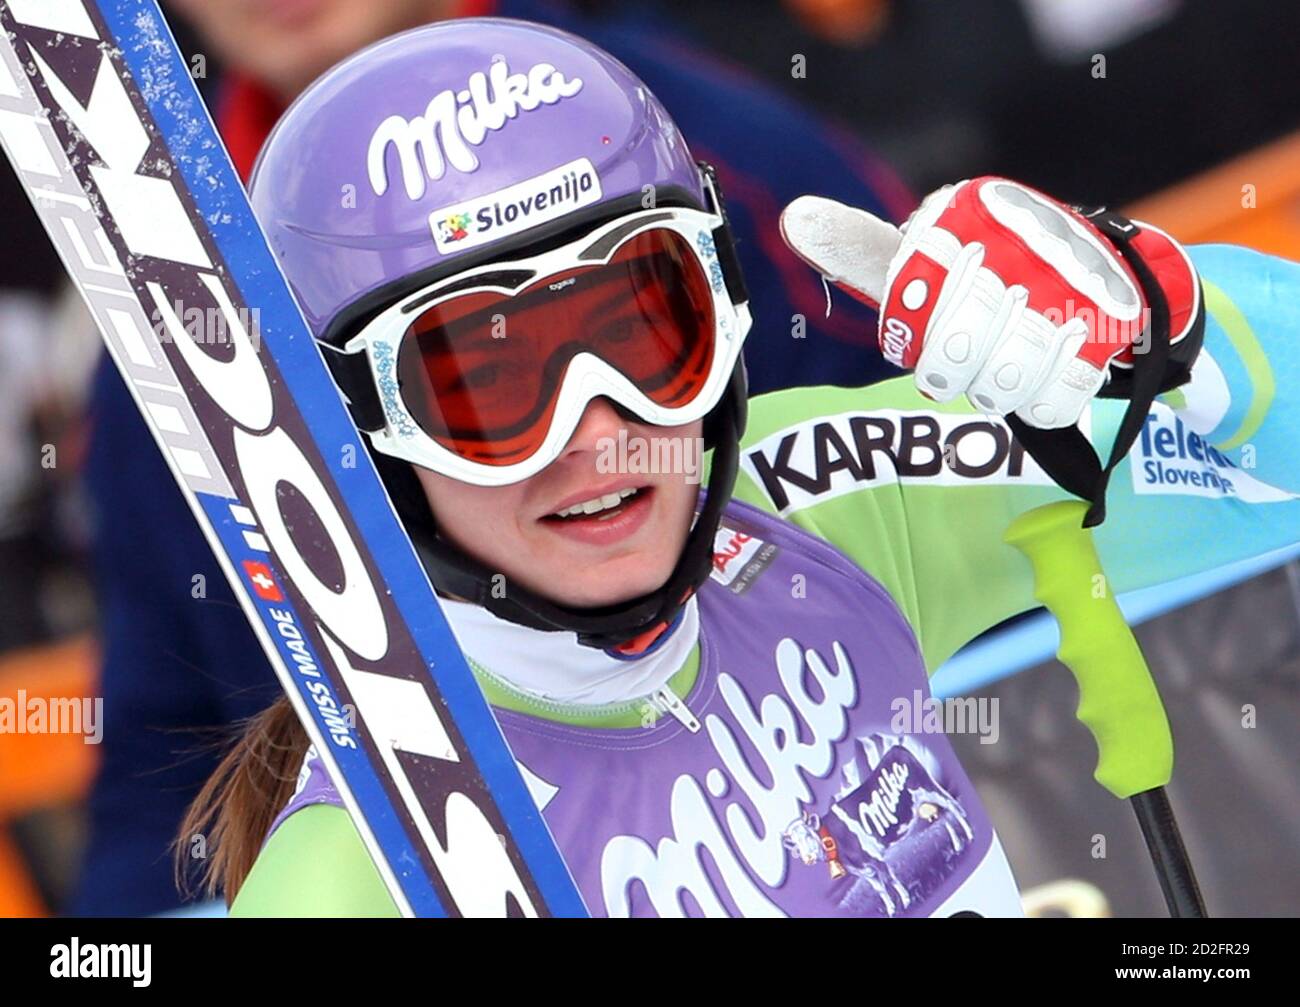 Tina Maze of Slovenia celebrates at the finish area after winning the Alpine Skiing World Cup women's Super-G in the northern Italian ski resort of Tarvisio February 22, 2009. REUTERS/Alessandro Bianchi     (ITALY) Stock Photo